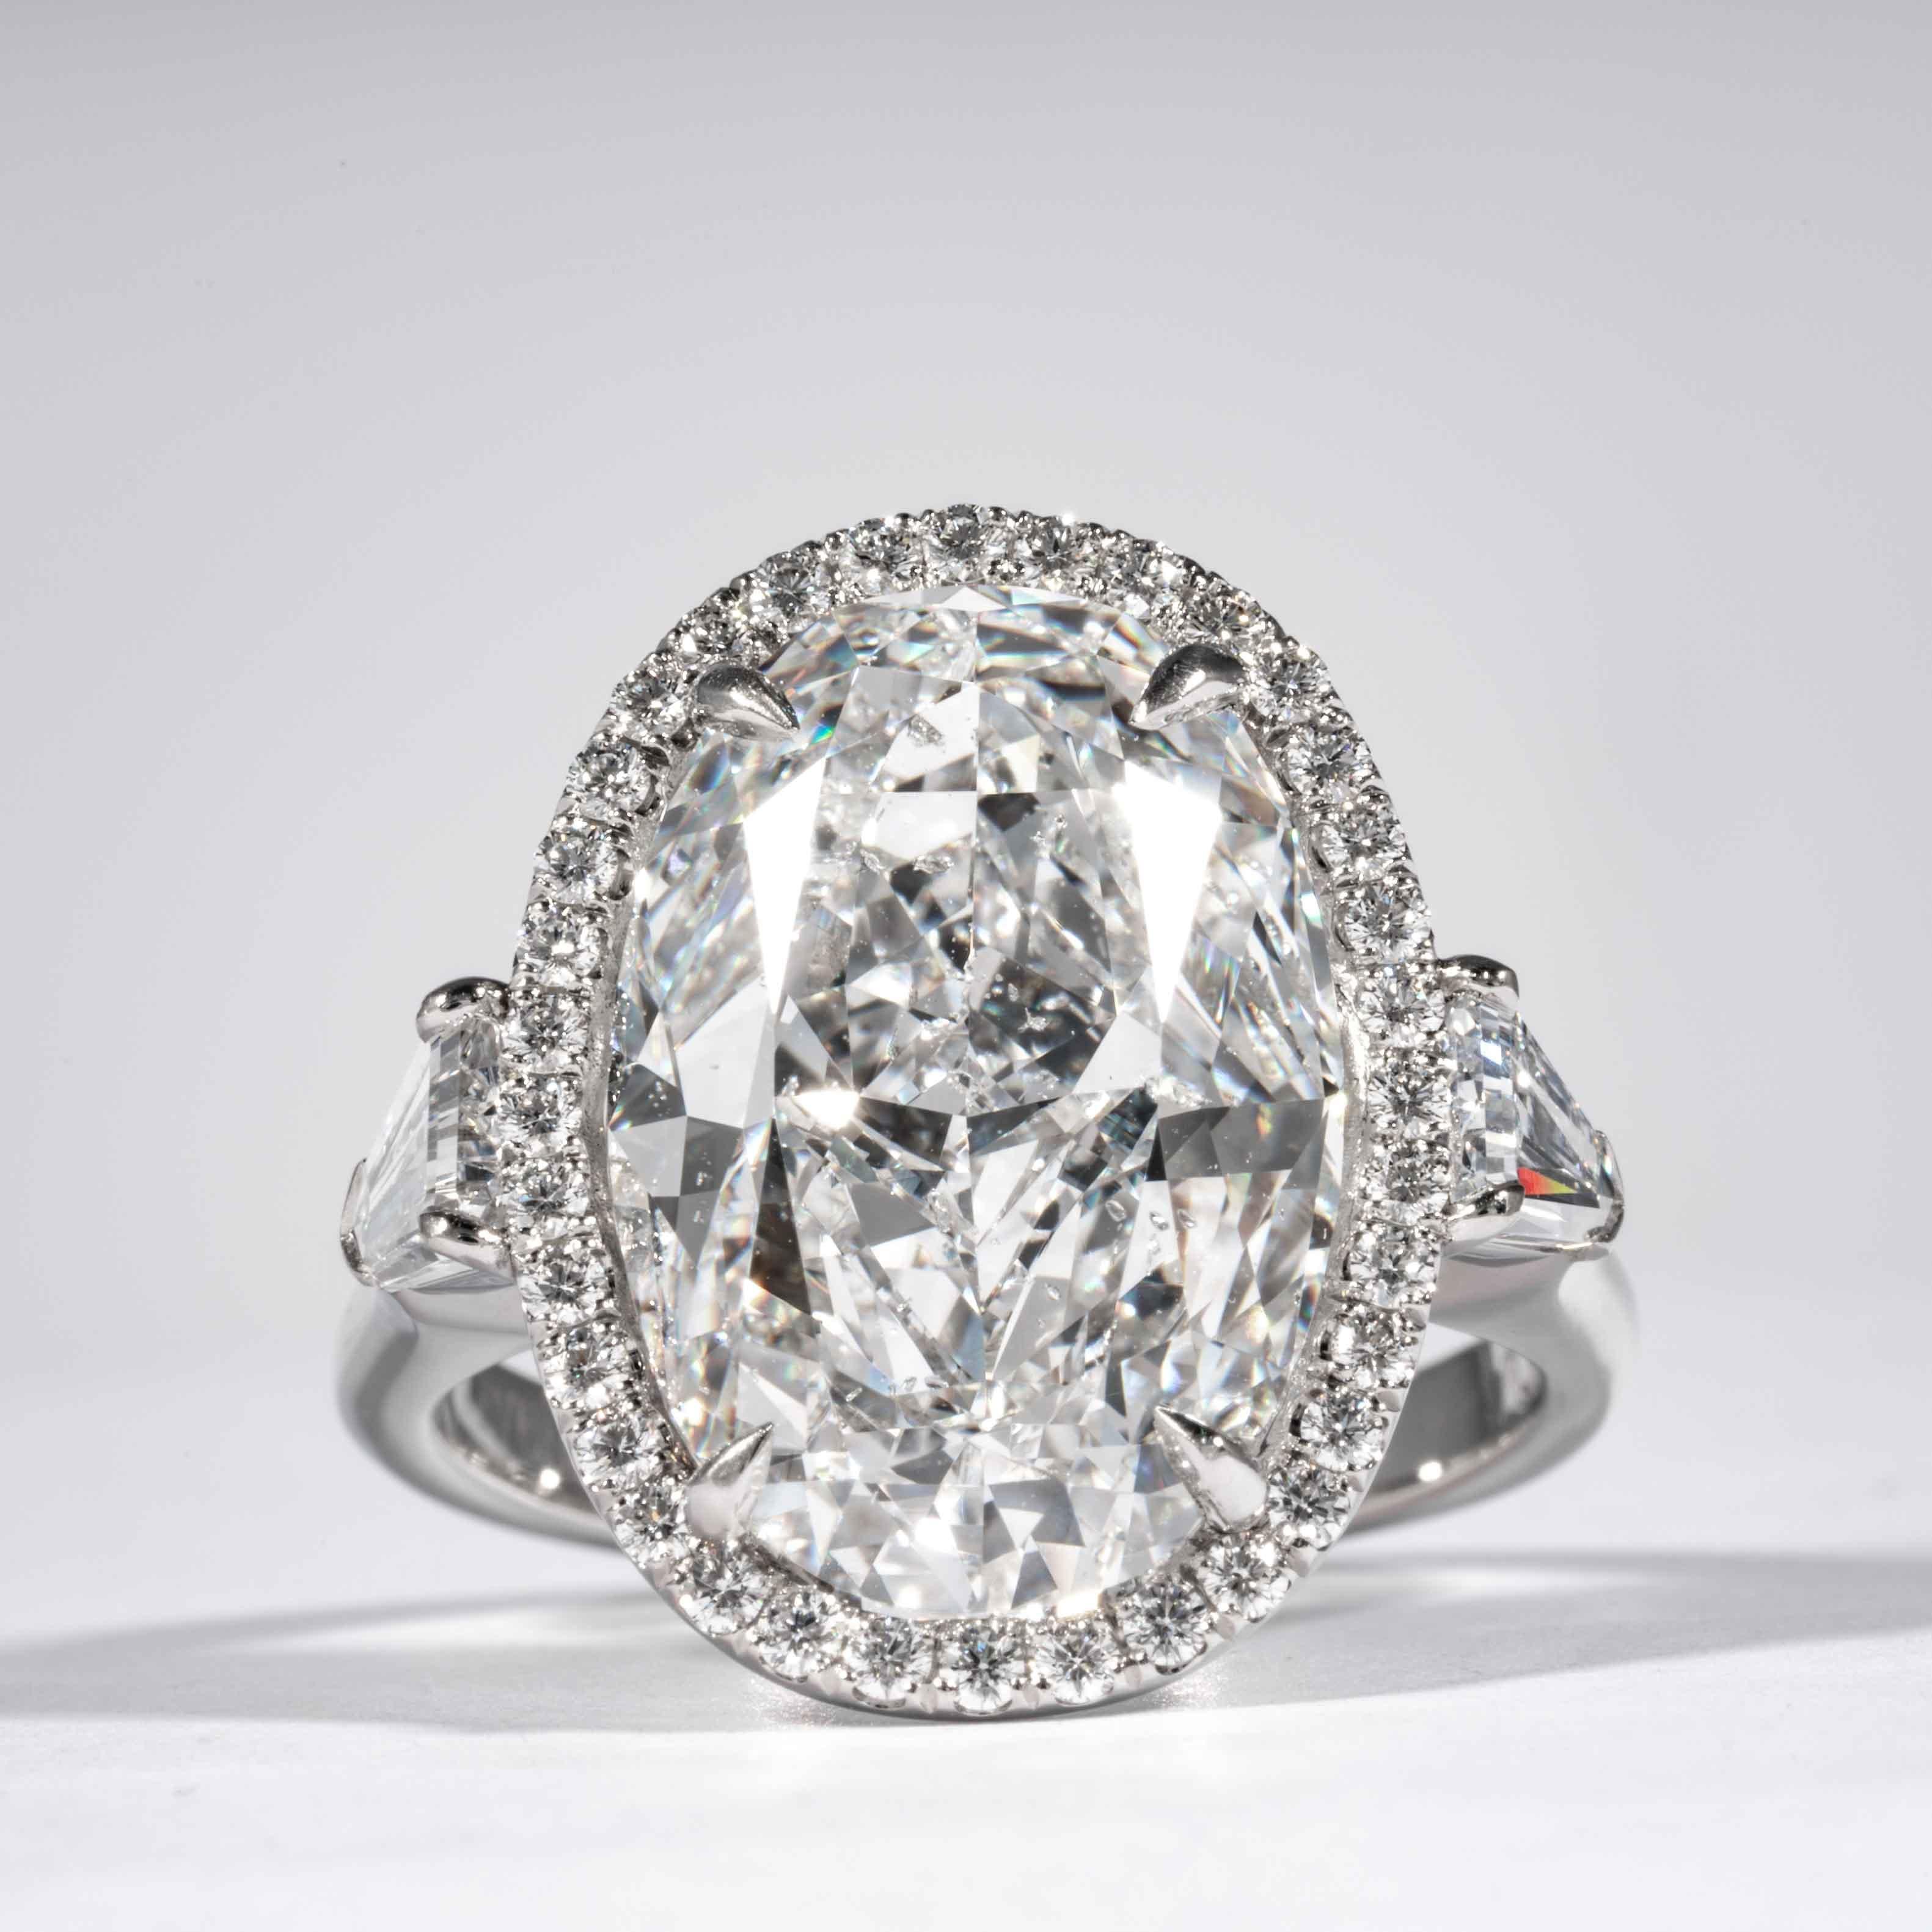 This oval cut diamond ring is offered by Shreve, Crump & Low. This 10.14 carat GIA Certified D SI2 oval cut diamond measuring 17.23 x 11.68 x 7.06 mm is custom set in a handcrafted Shreve, Crump & Low platinum 3-stone ring. The 10.14 carat oval cut